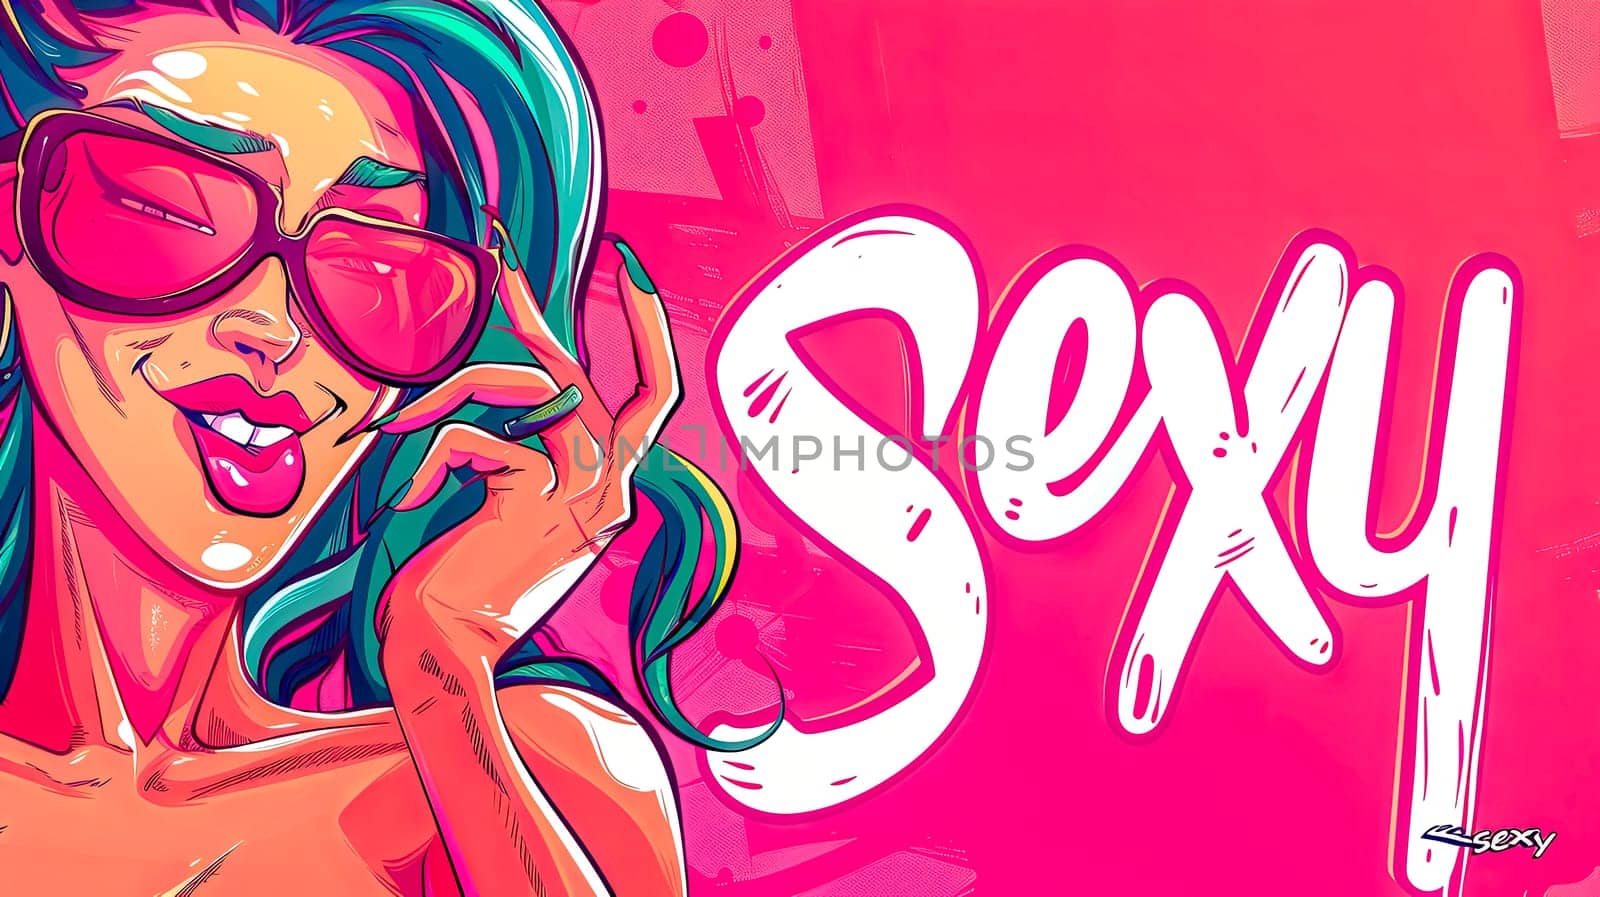 Vibrant pop art woman with sexy text by Edophoto